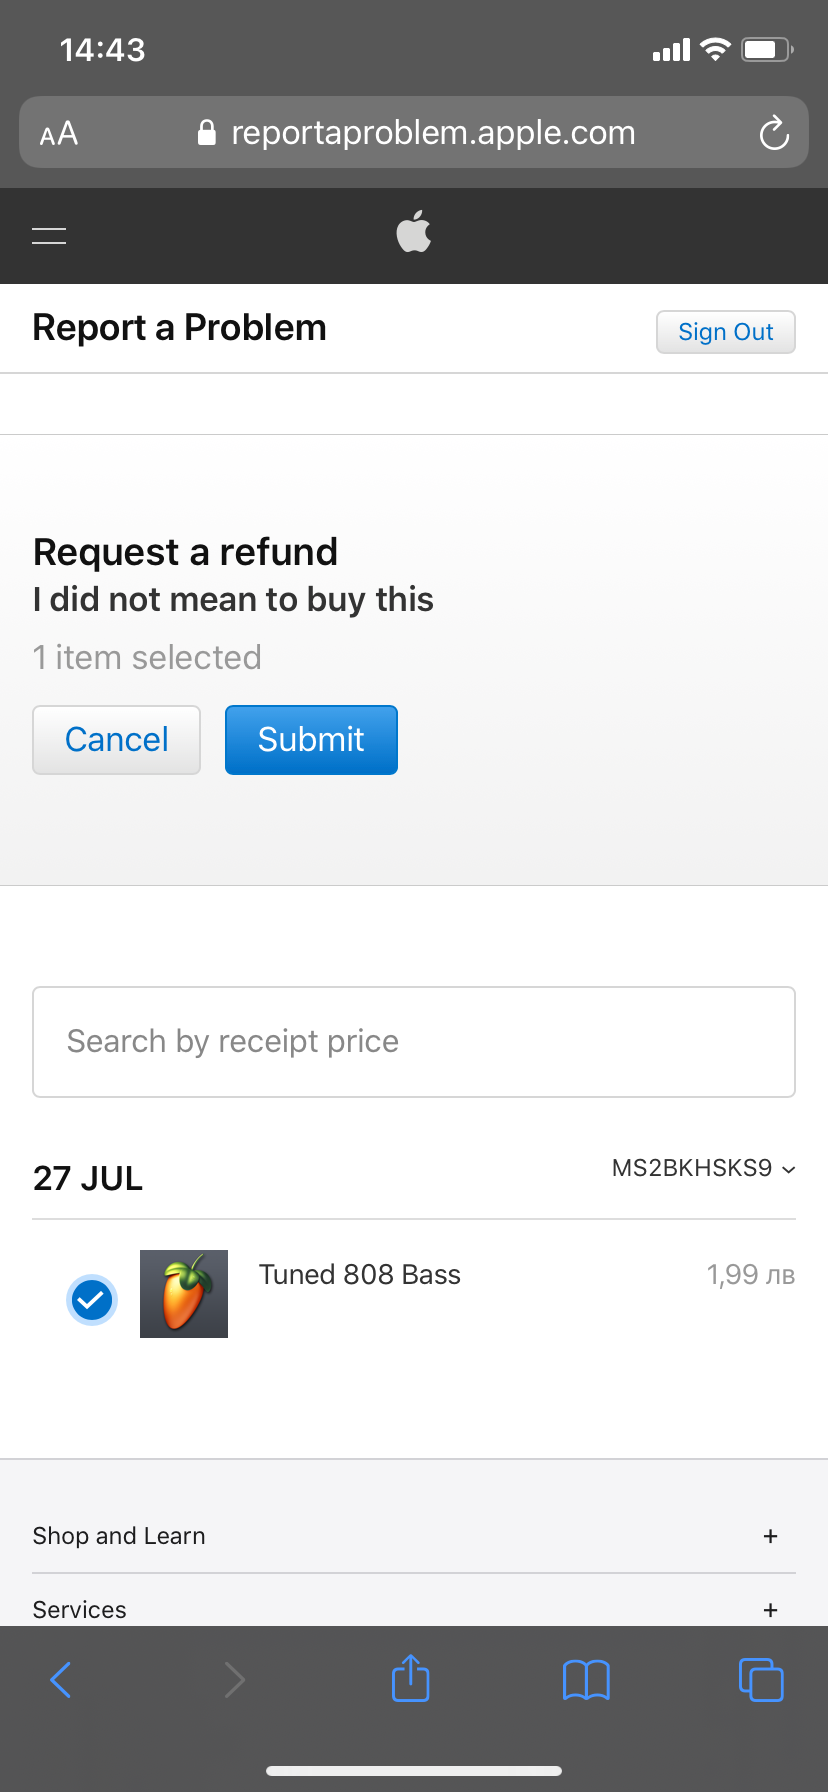 How to get an iPhone app refund from Apple